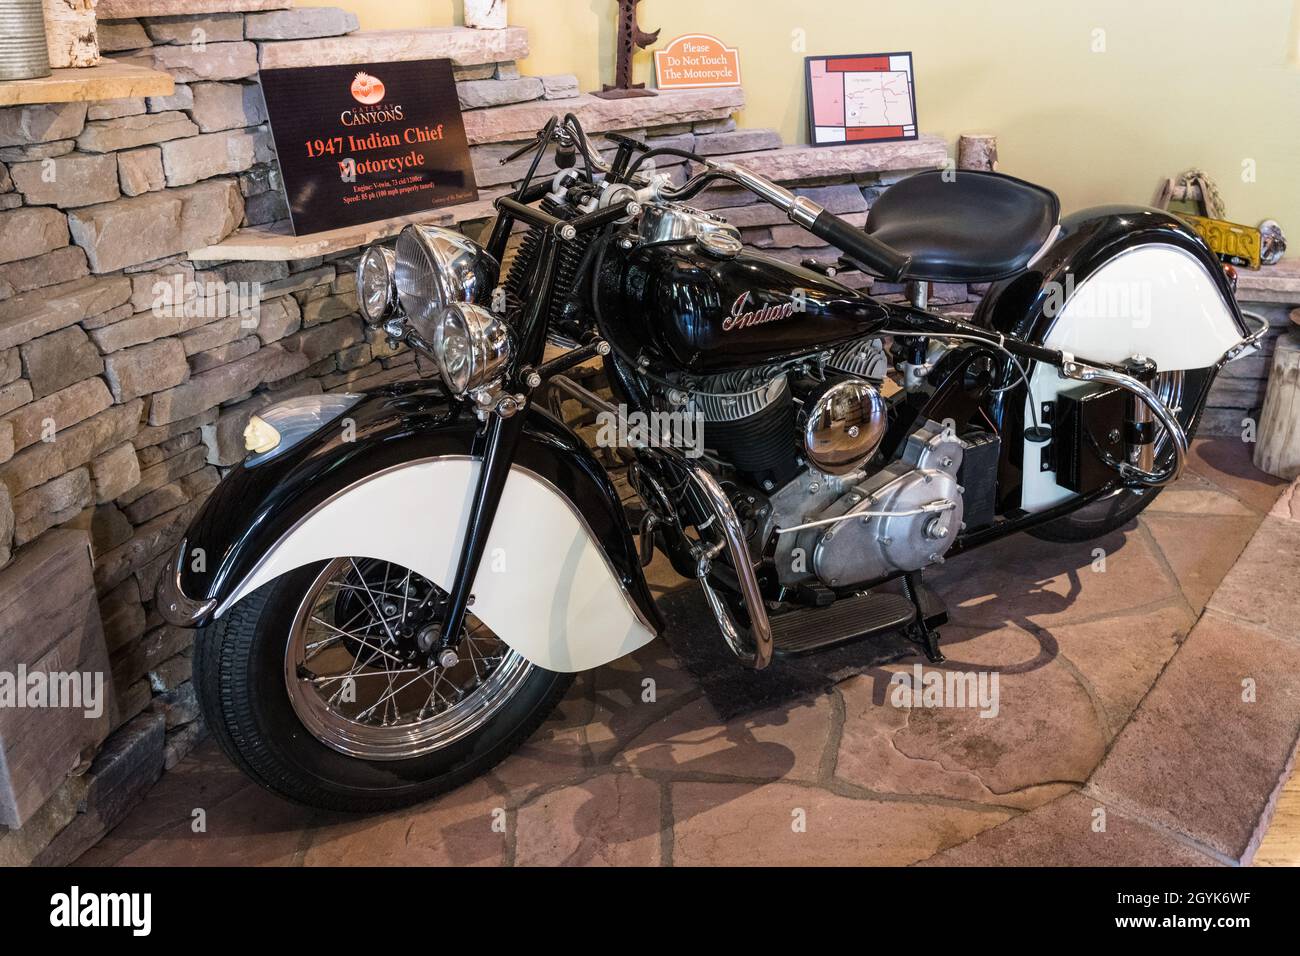 A classic 1947 Indian Chief motorcycle on display in a restaurant in ...